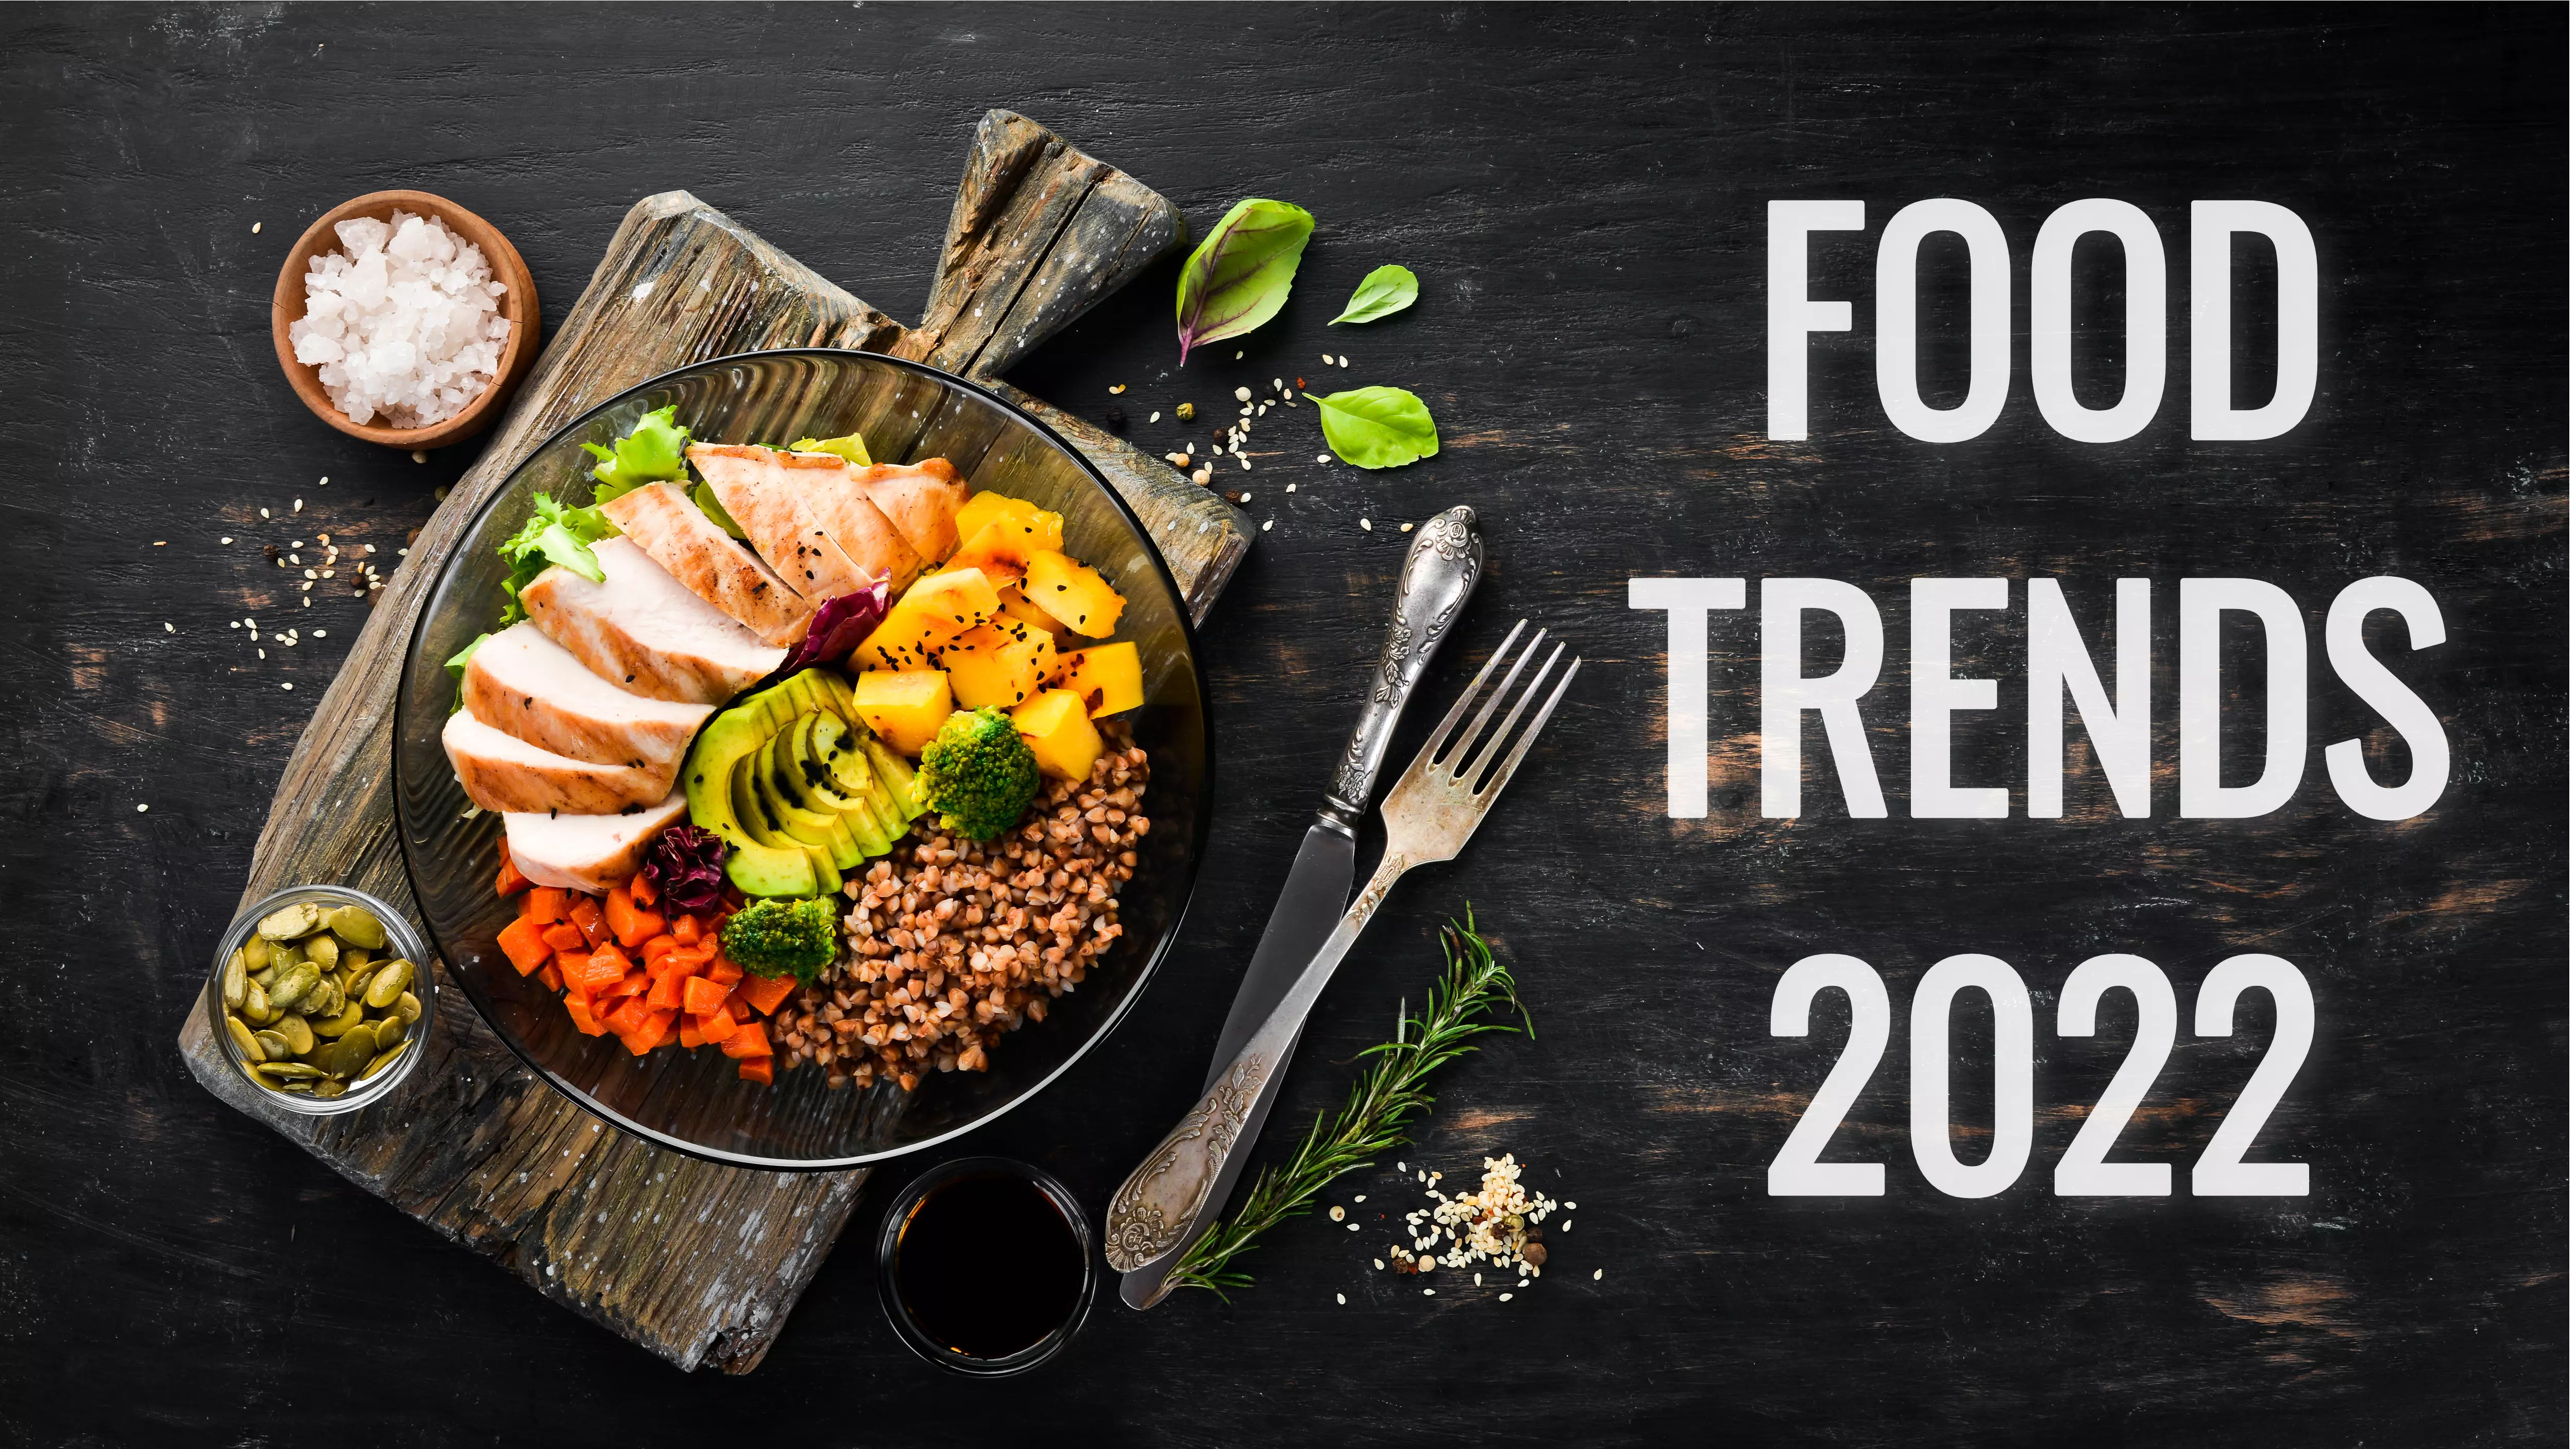 Top 7 food trends that will dictate the food industry in 2022